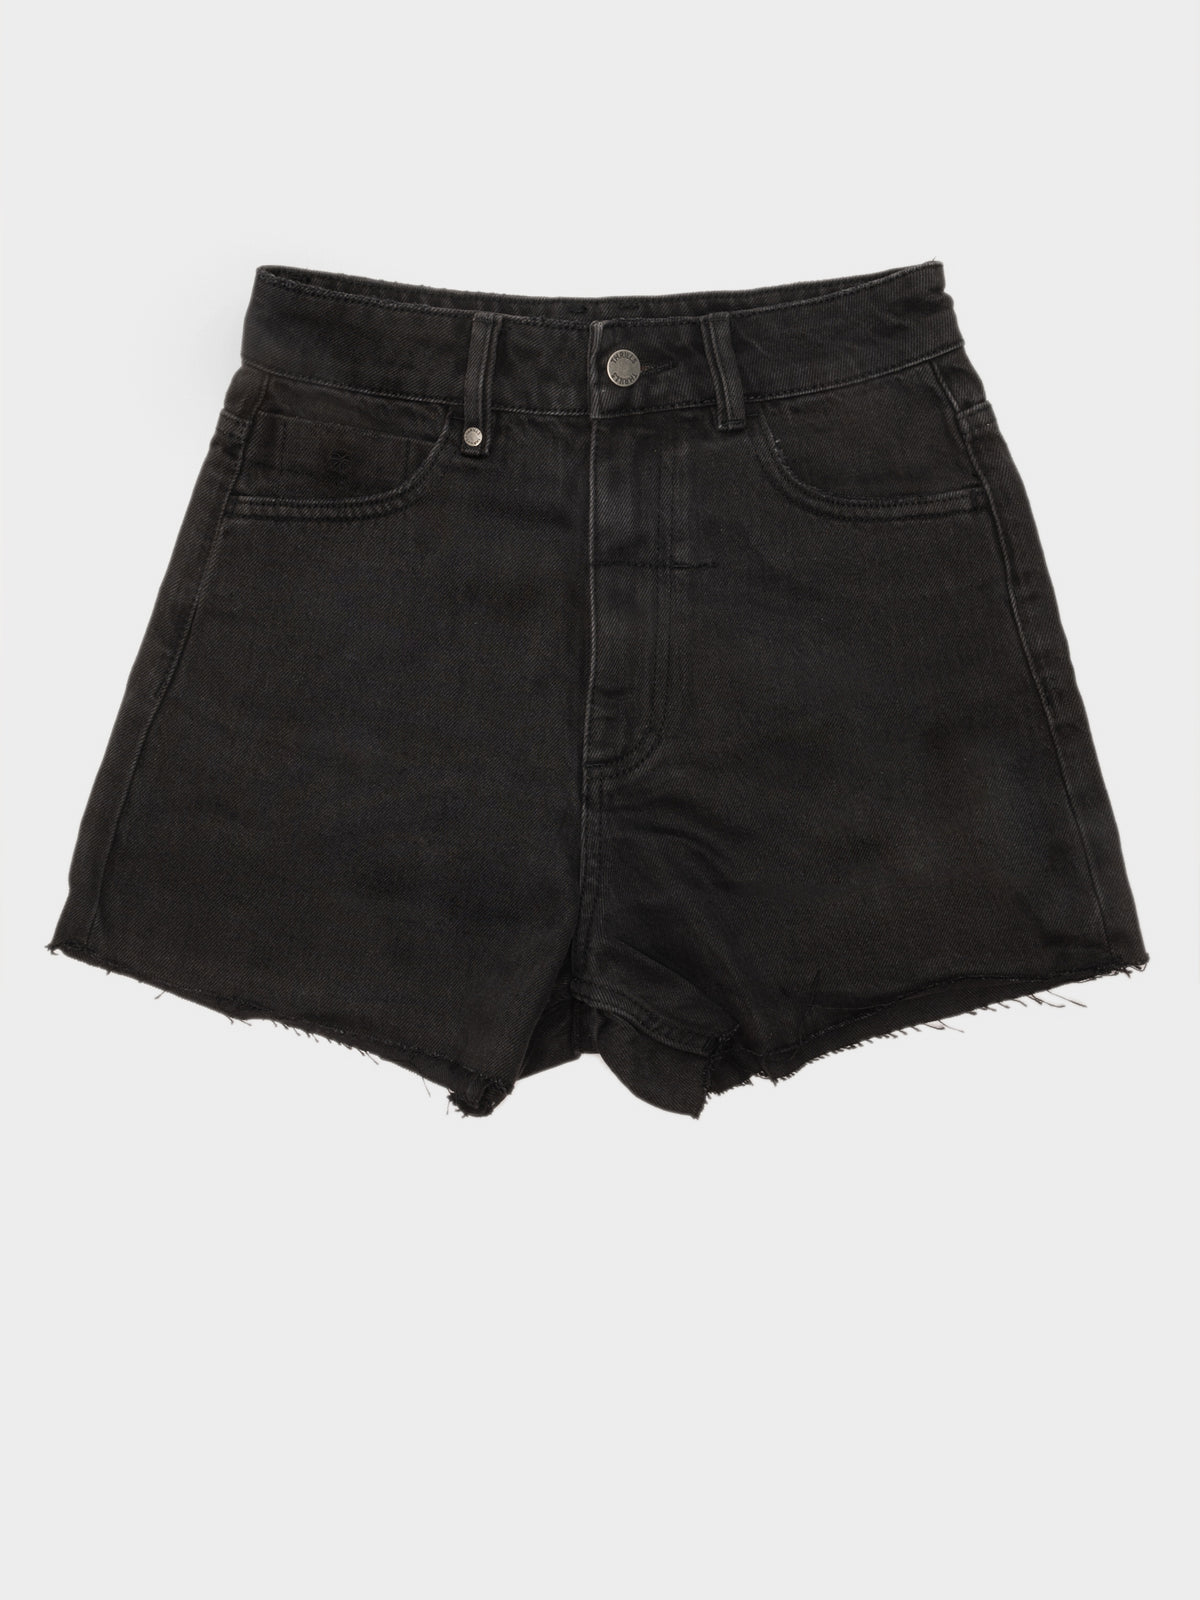 Erica Shorts in Faded Black